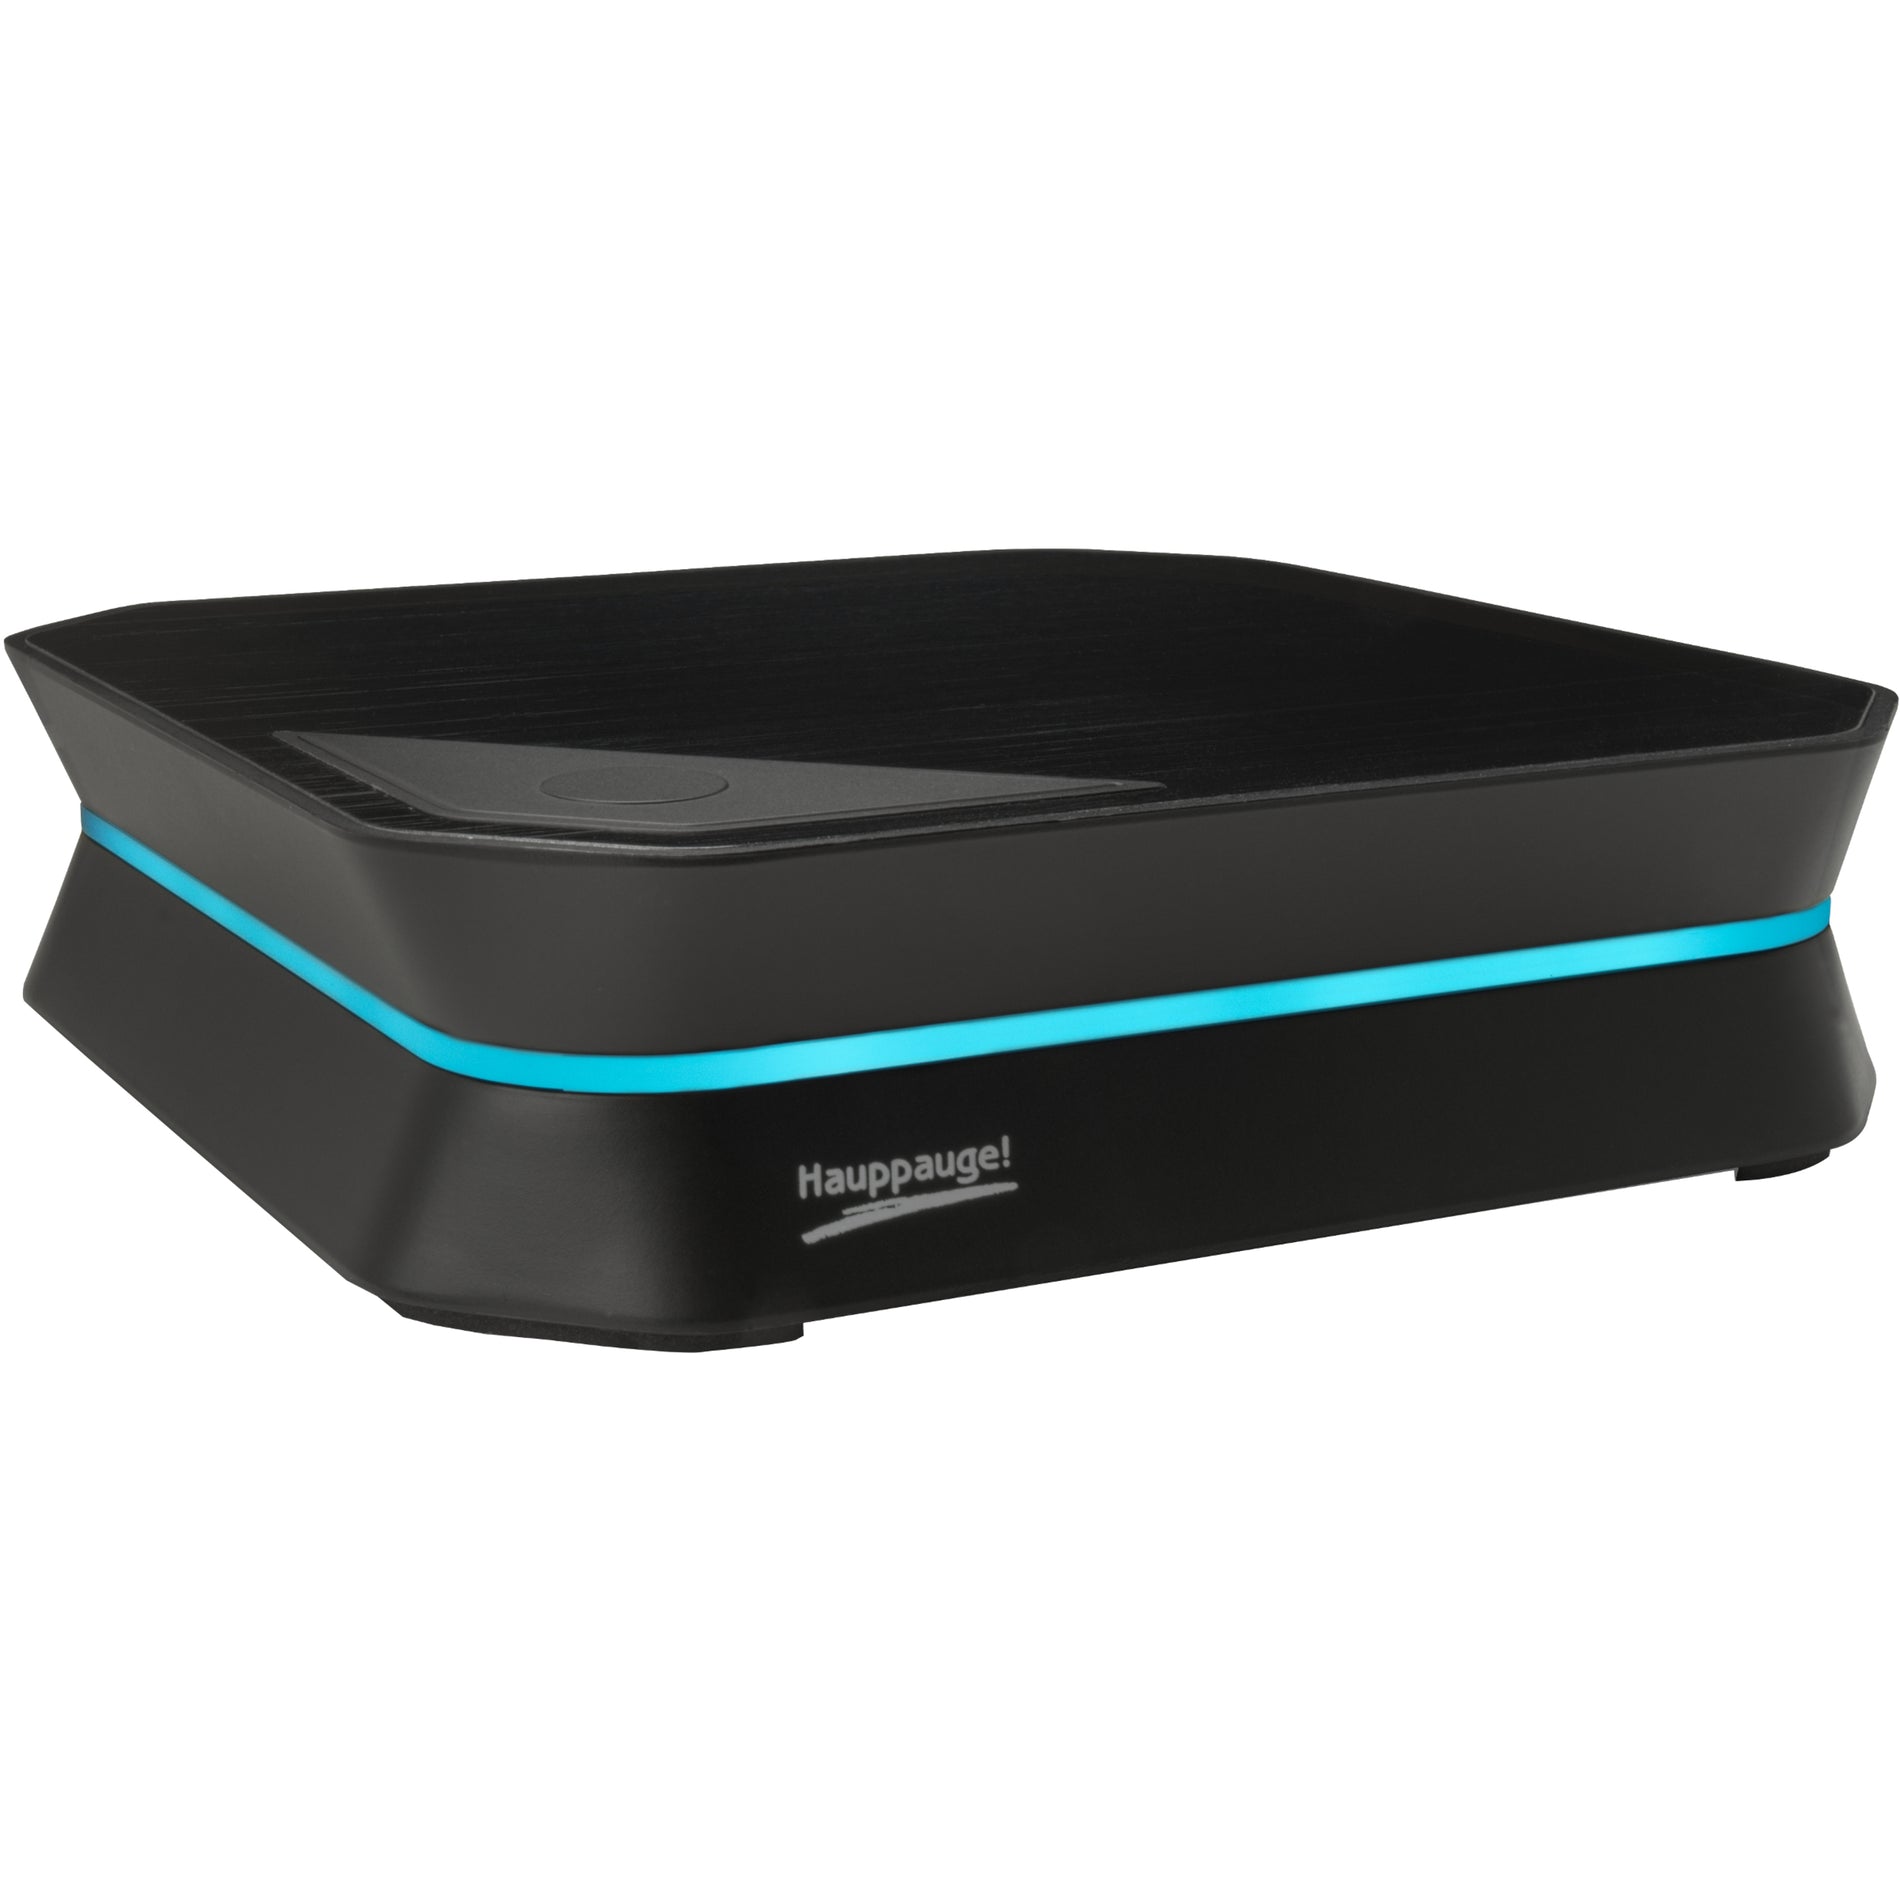 Hauppauge 1512 HD PVR 2 Video Capturing Device, High-Quality Gaming Console Video Recorder